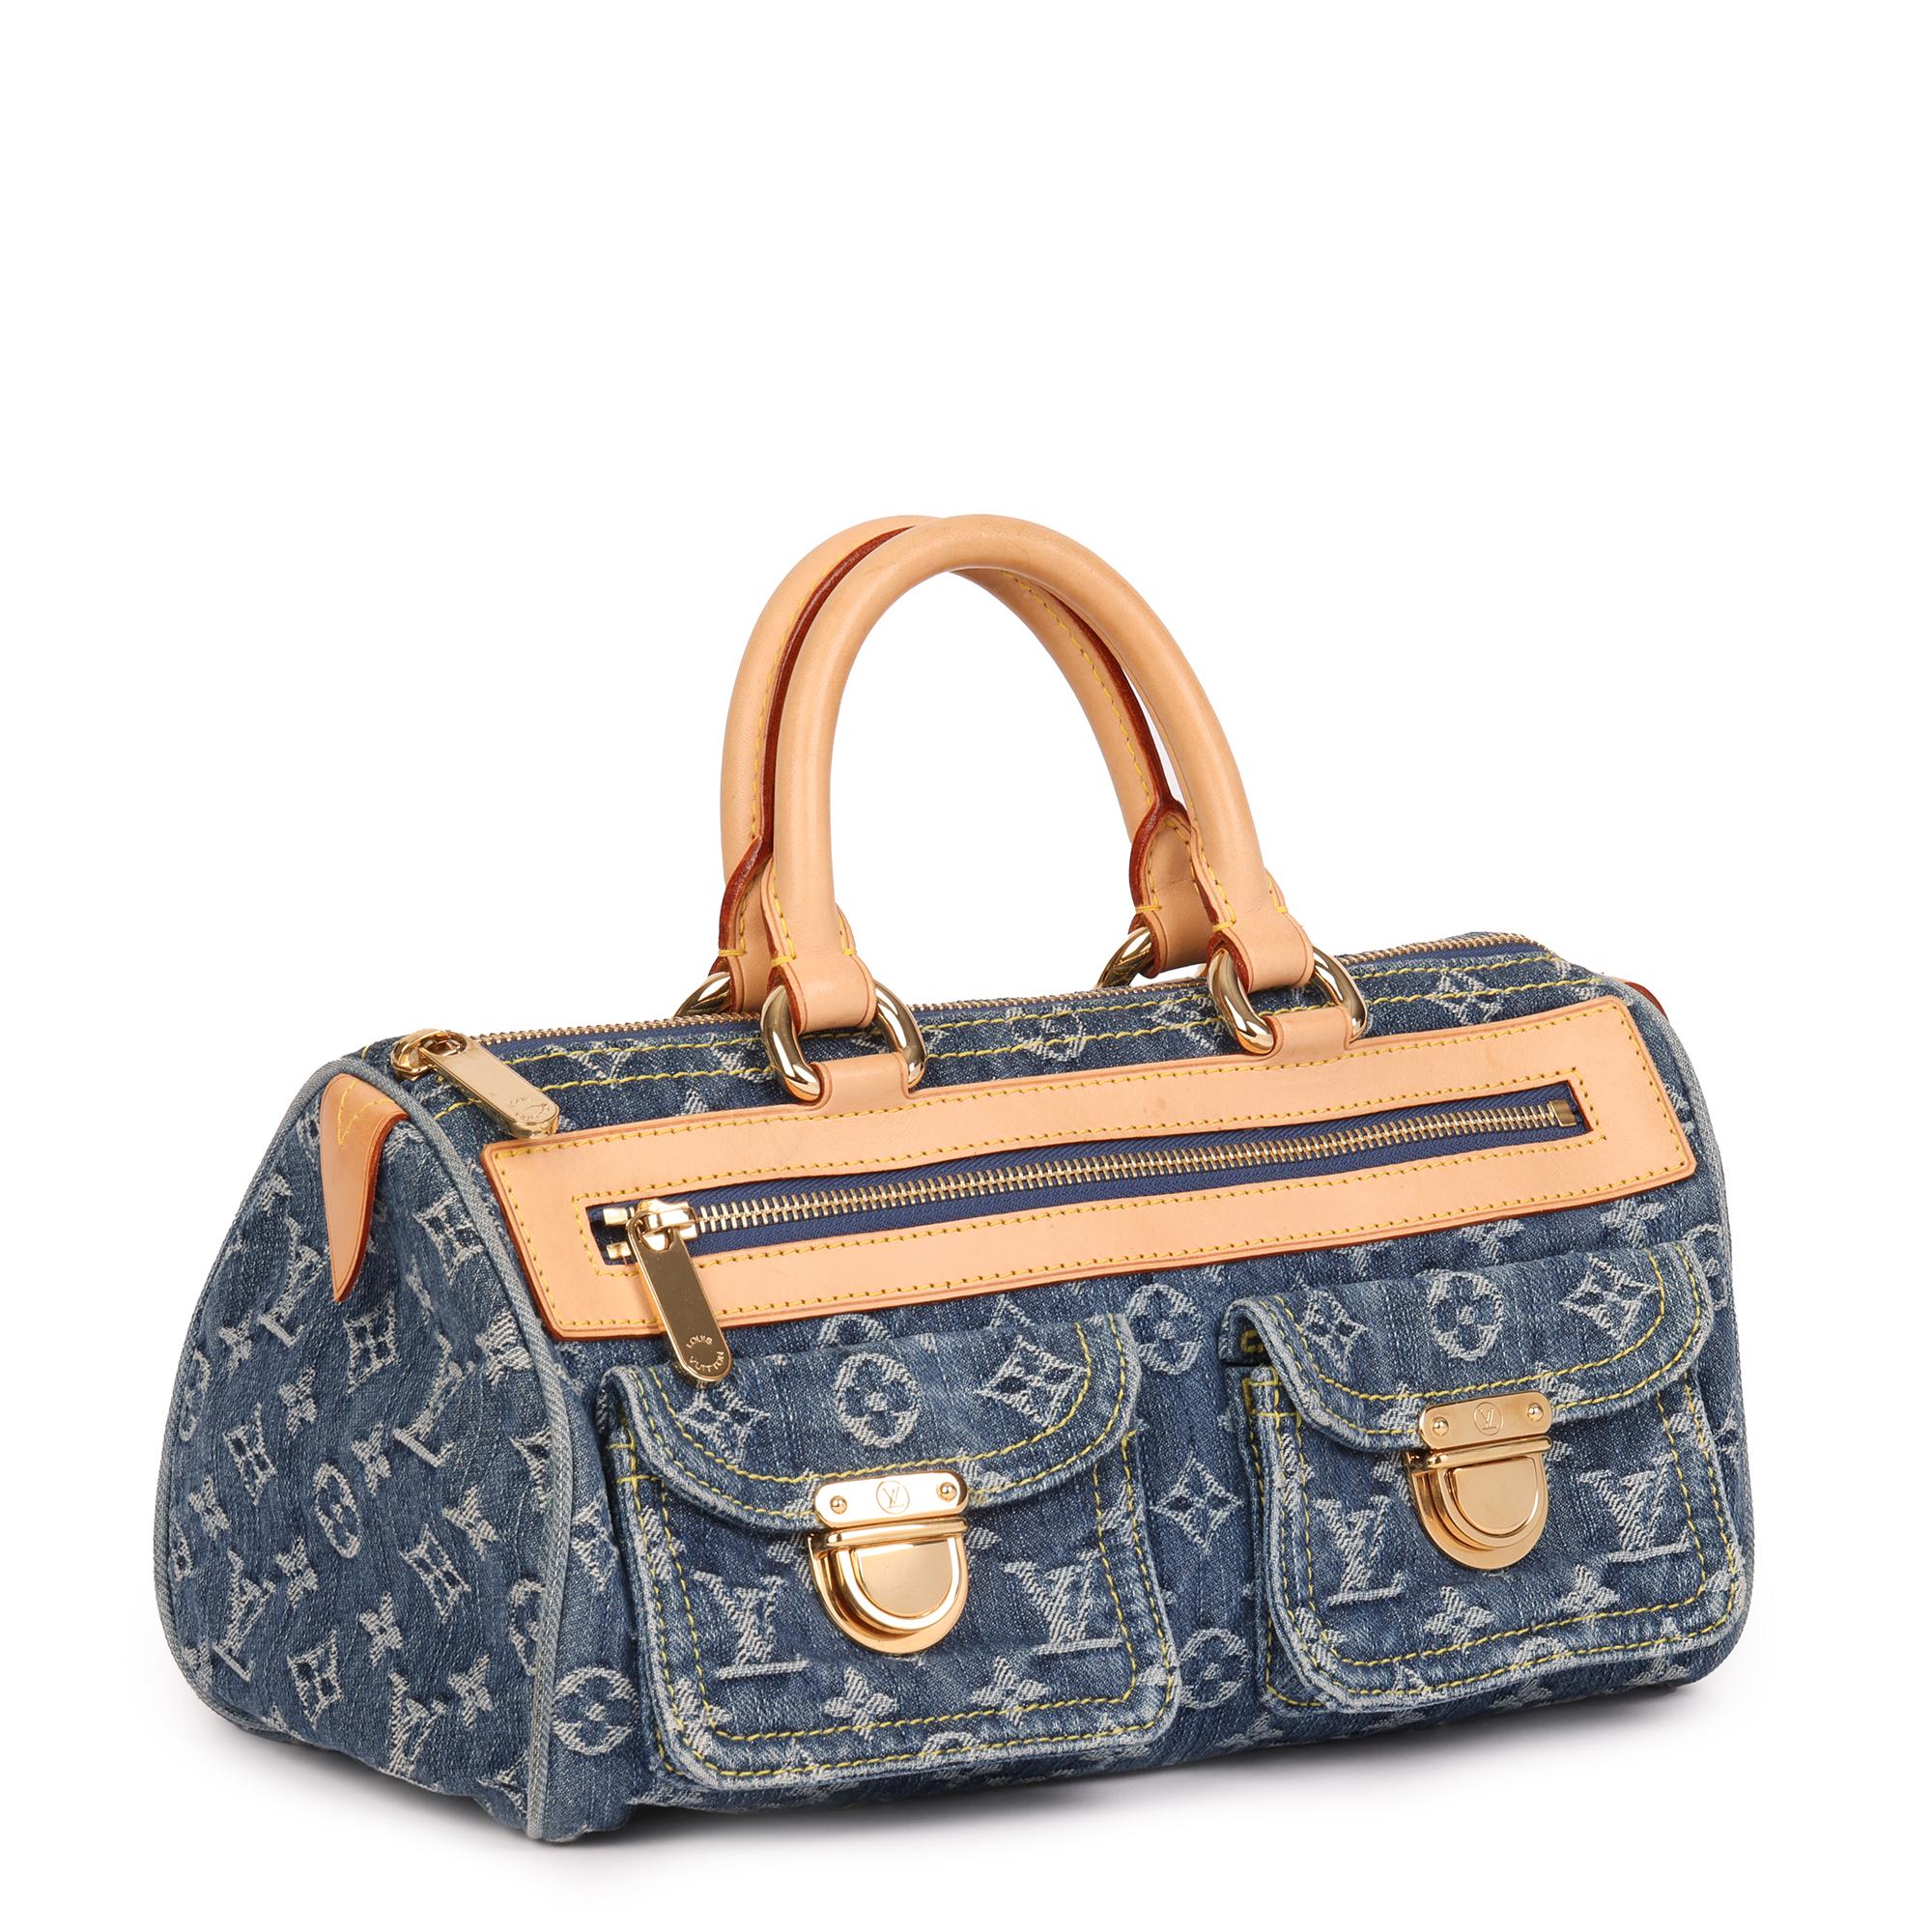 LOUIS VUITTON
Blue Monogram Denim & Vachetta Leather Neo Speedy 30

Xupes Reference: HB4099
Serial Number: SD1015
Age (Circa): 2005
Accompanied By: Louis Vuitton Dust Bag
Authenticity Details: Date Stamp (Made in the USA)
Gender: Ladies
Type: